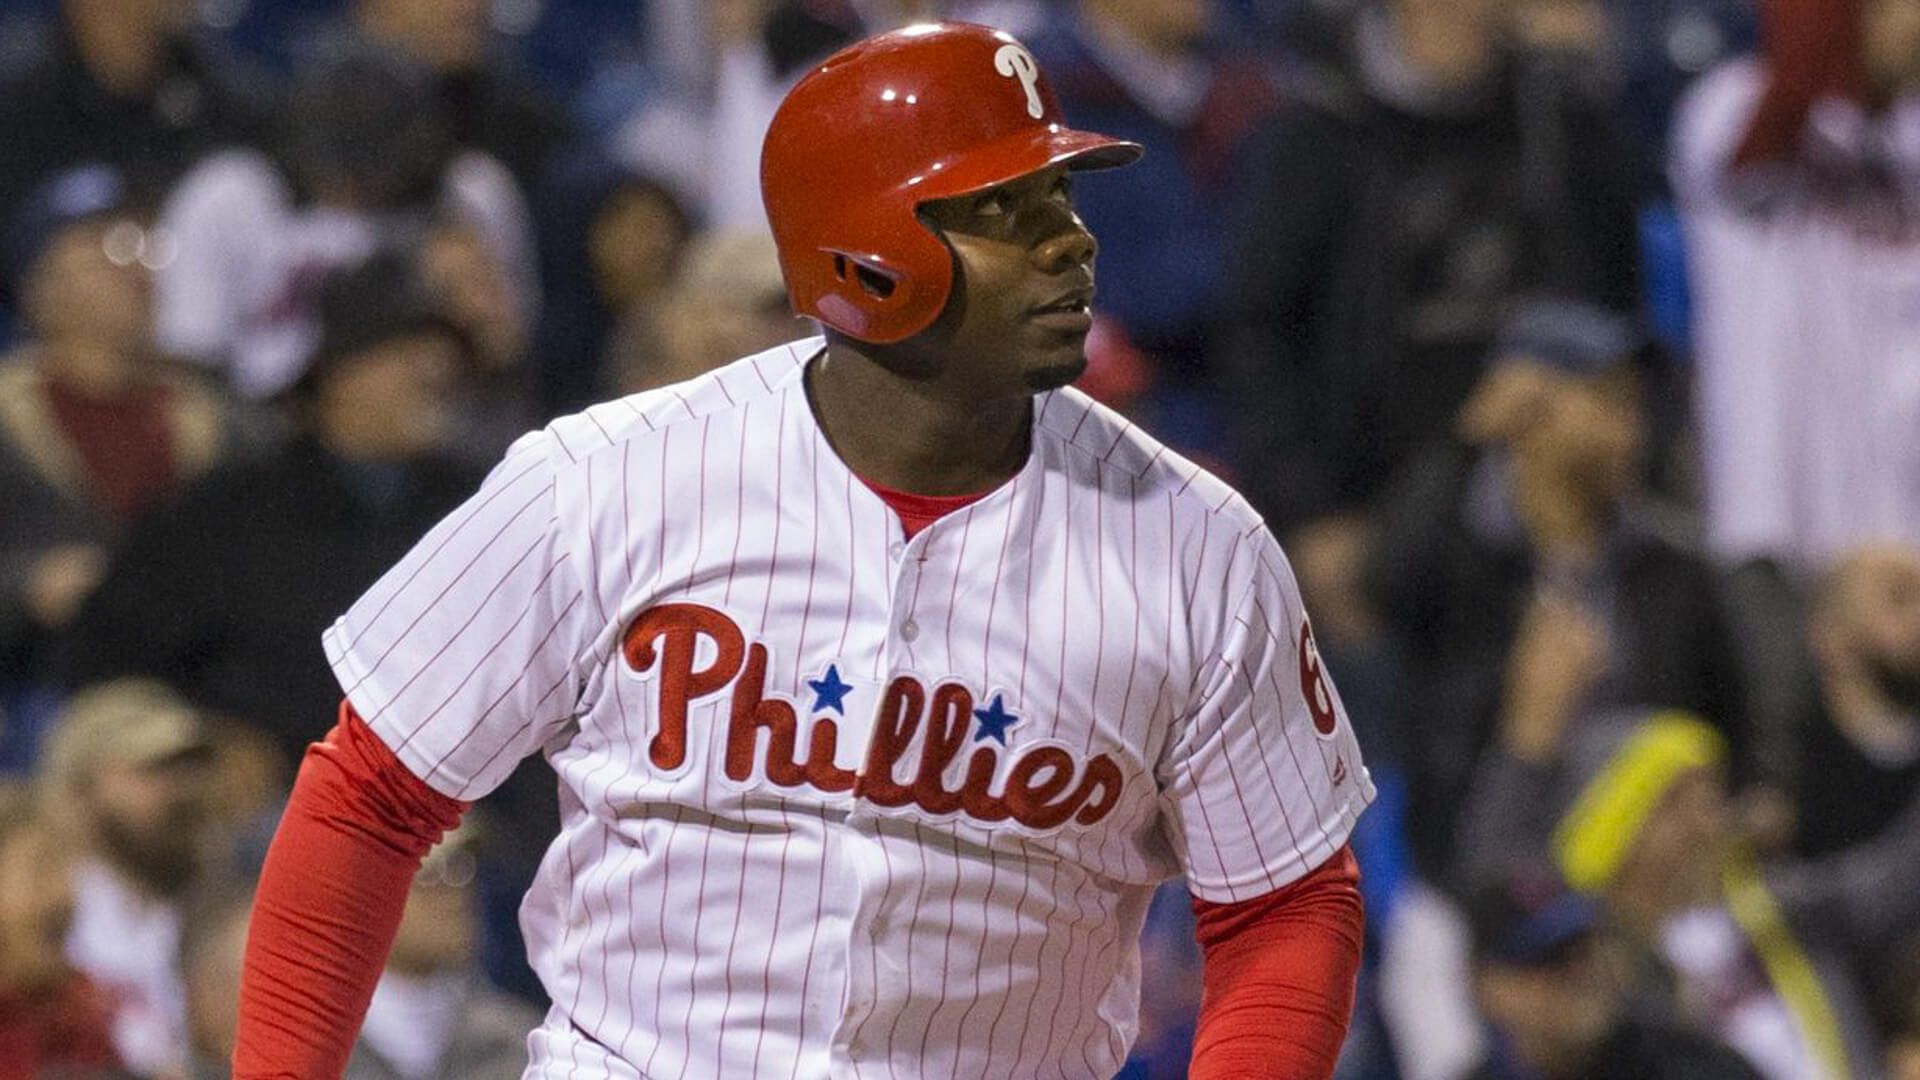 Ryan Howard is now an Albuquerque Isotope